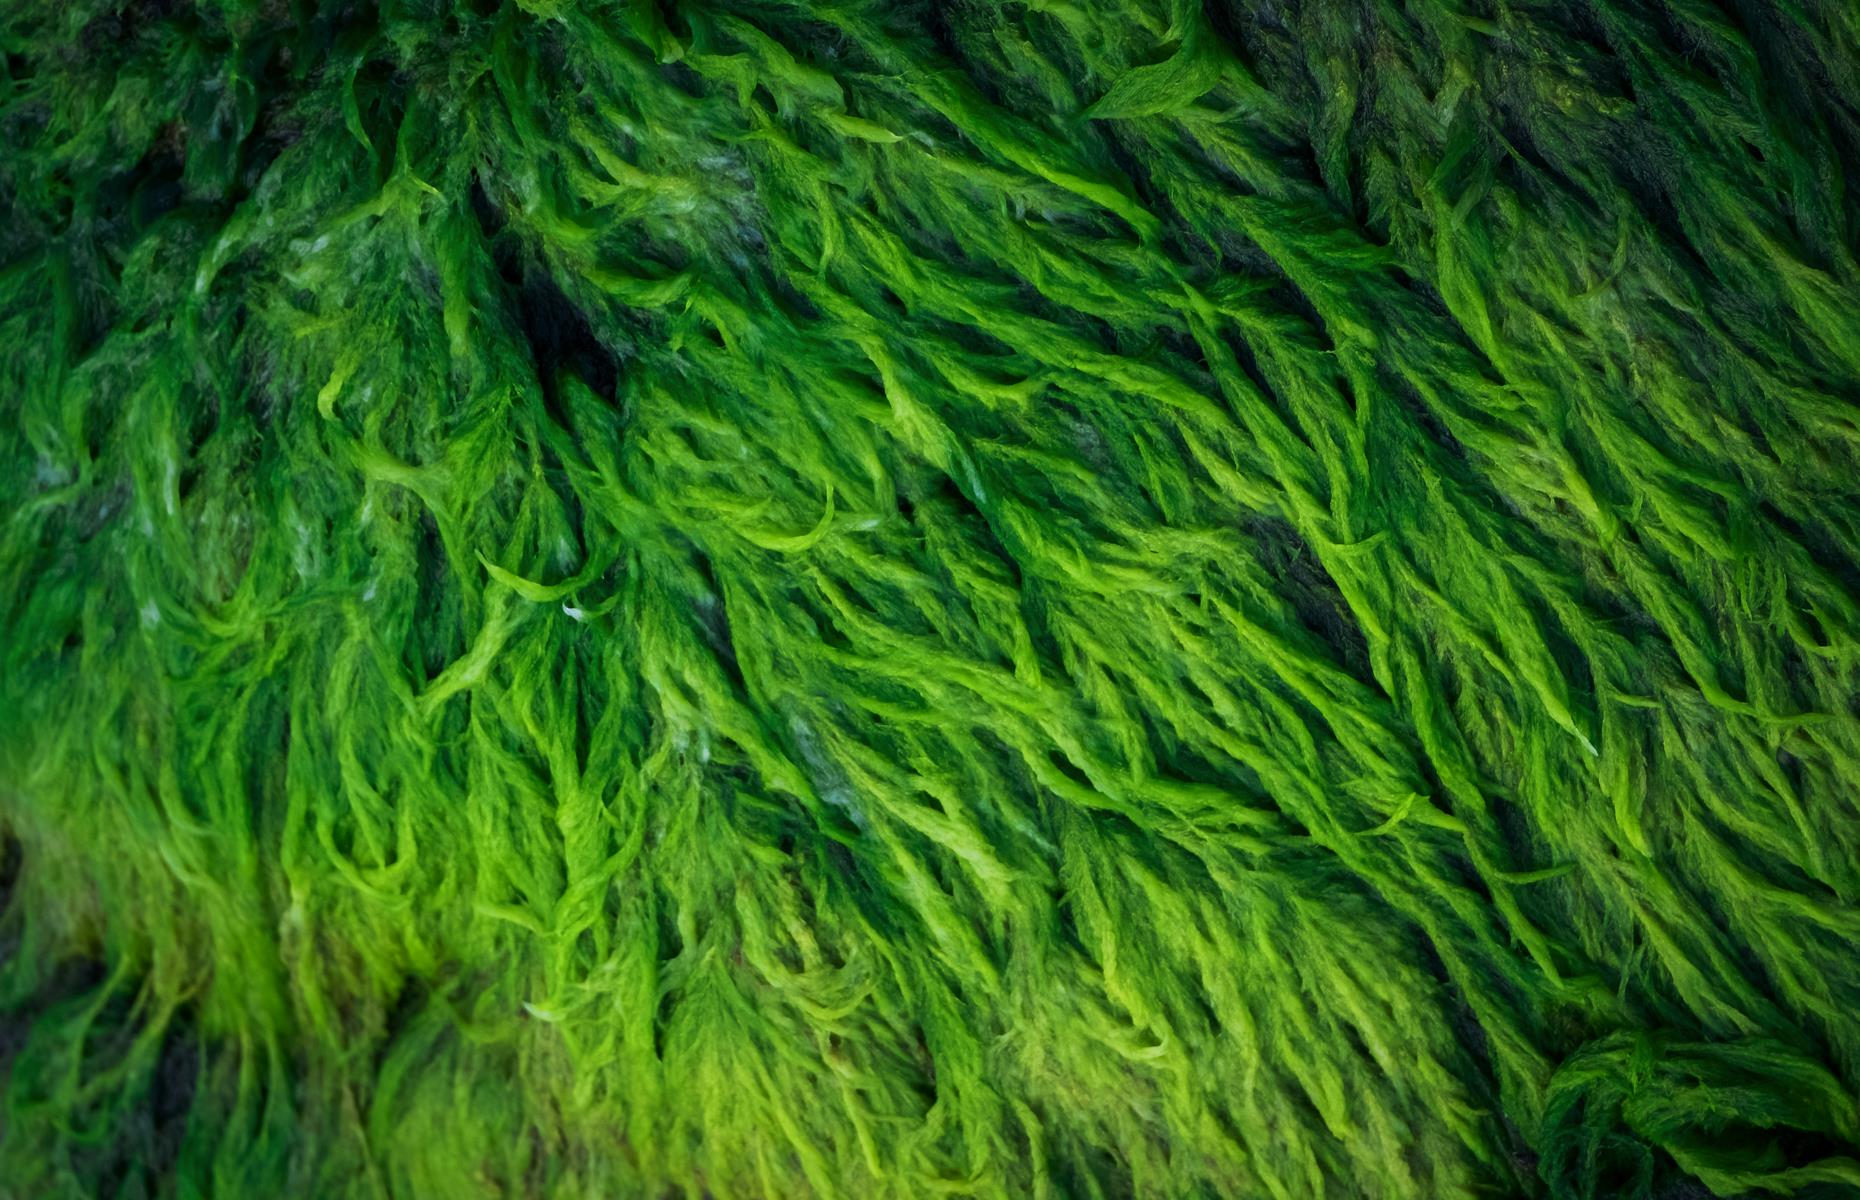 The Philippines are big in the algae business